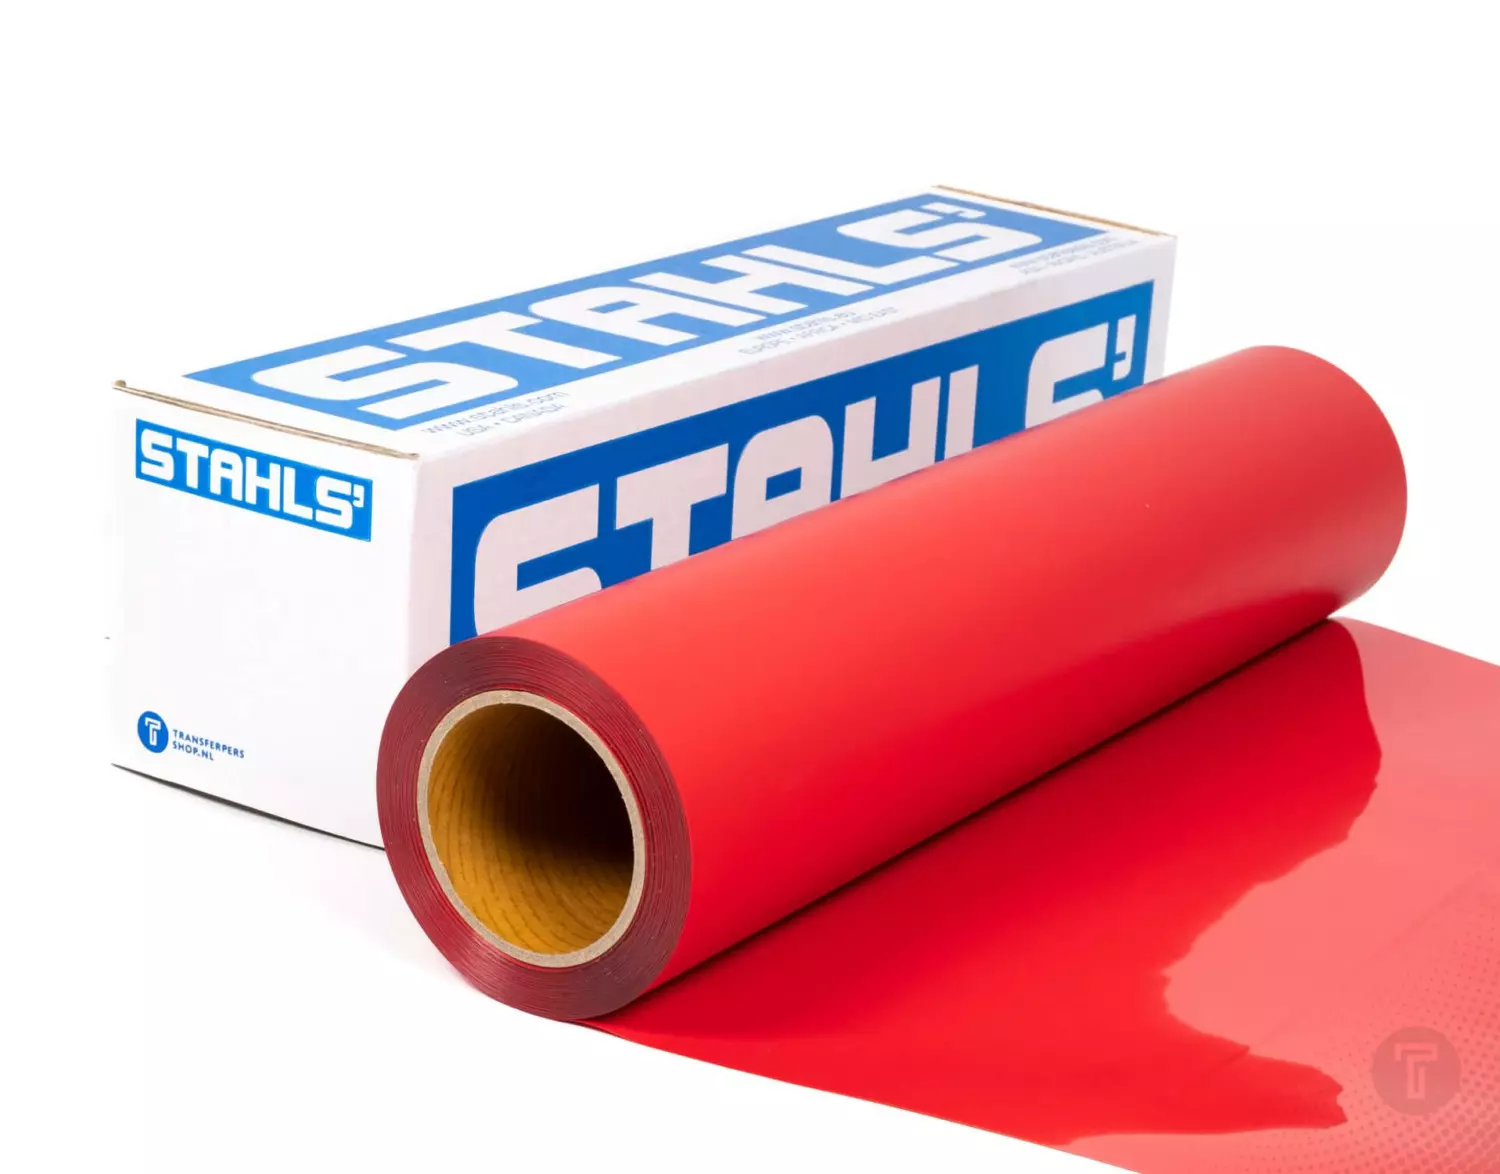 Stahls cad cut silicone 100 red 200